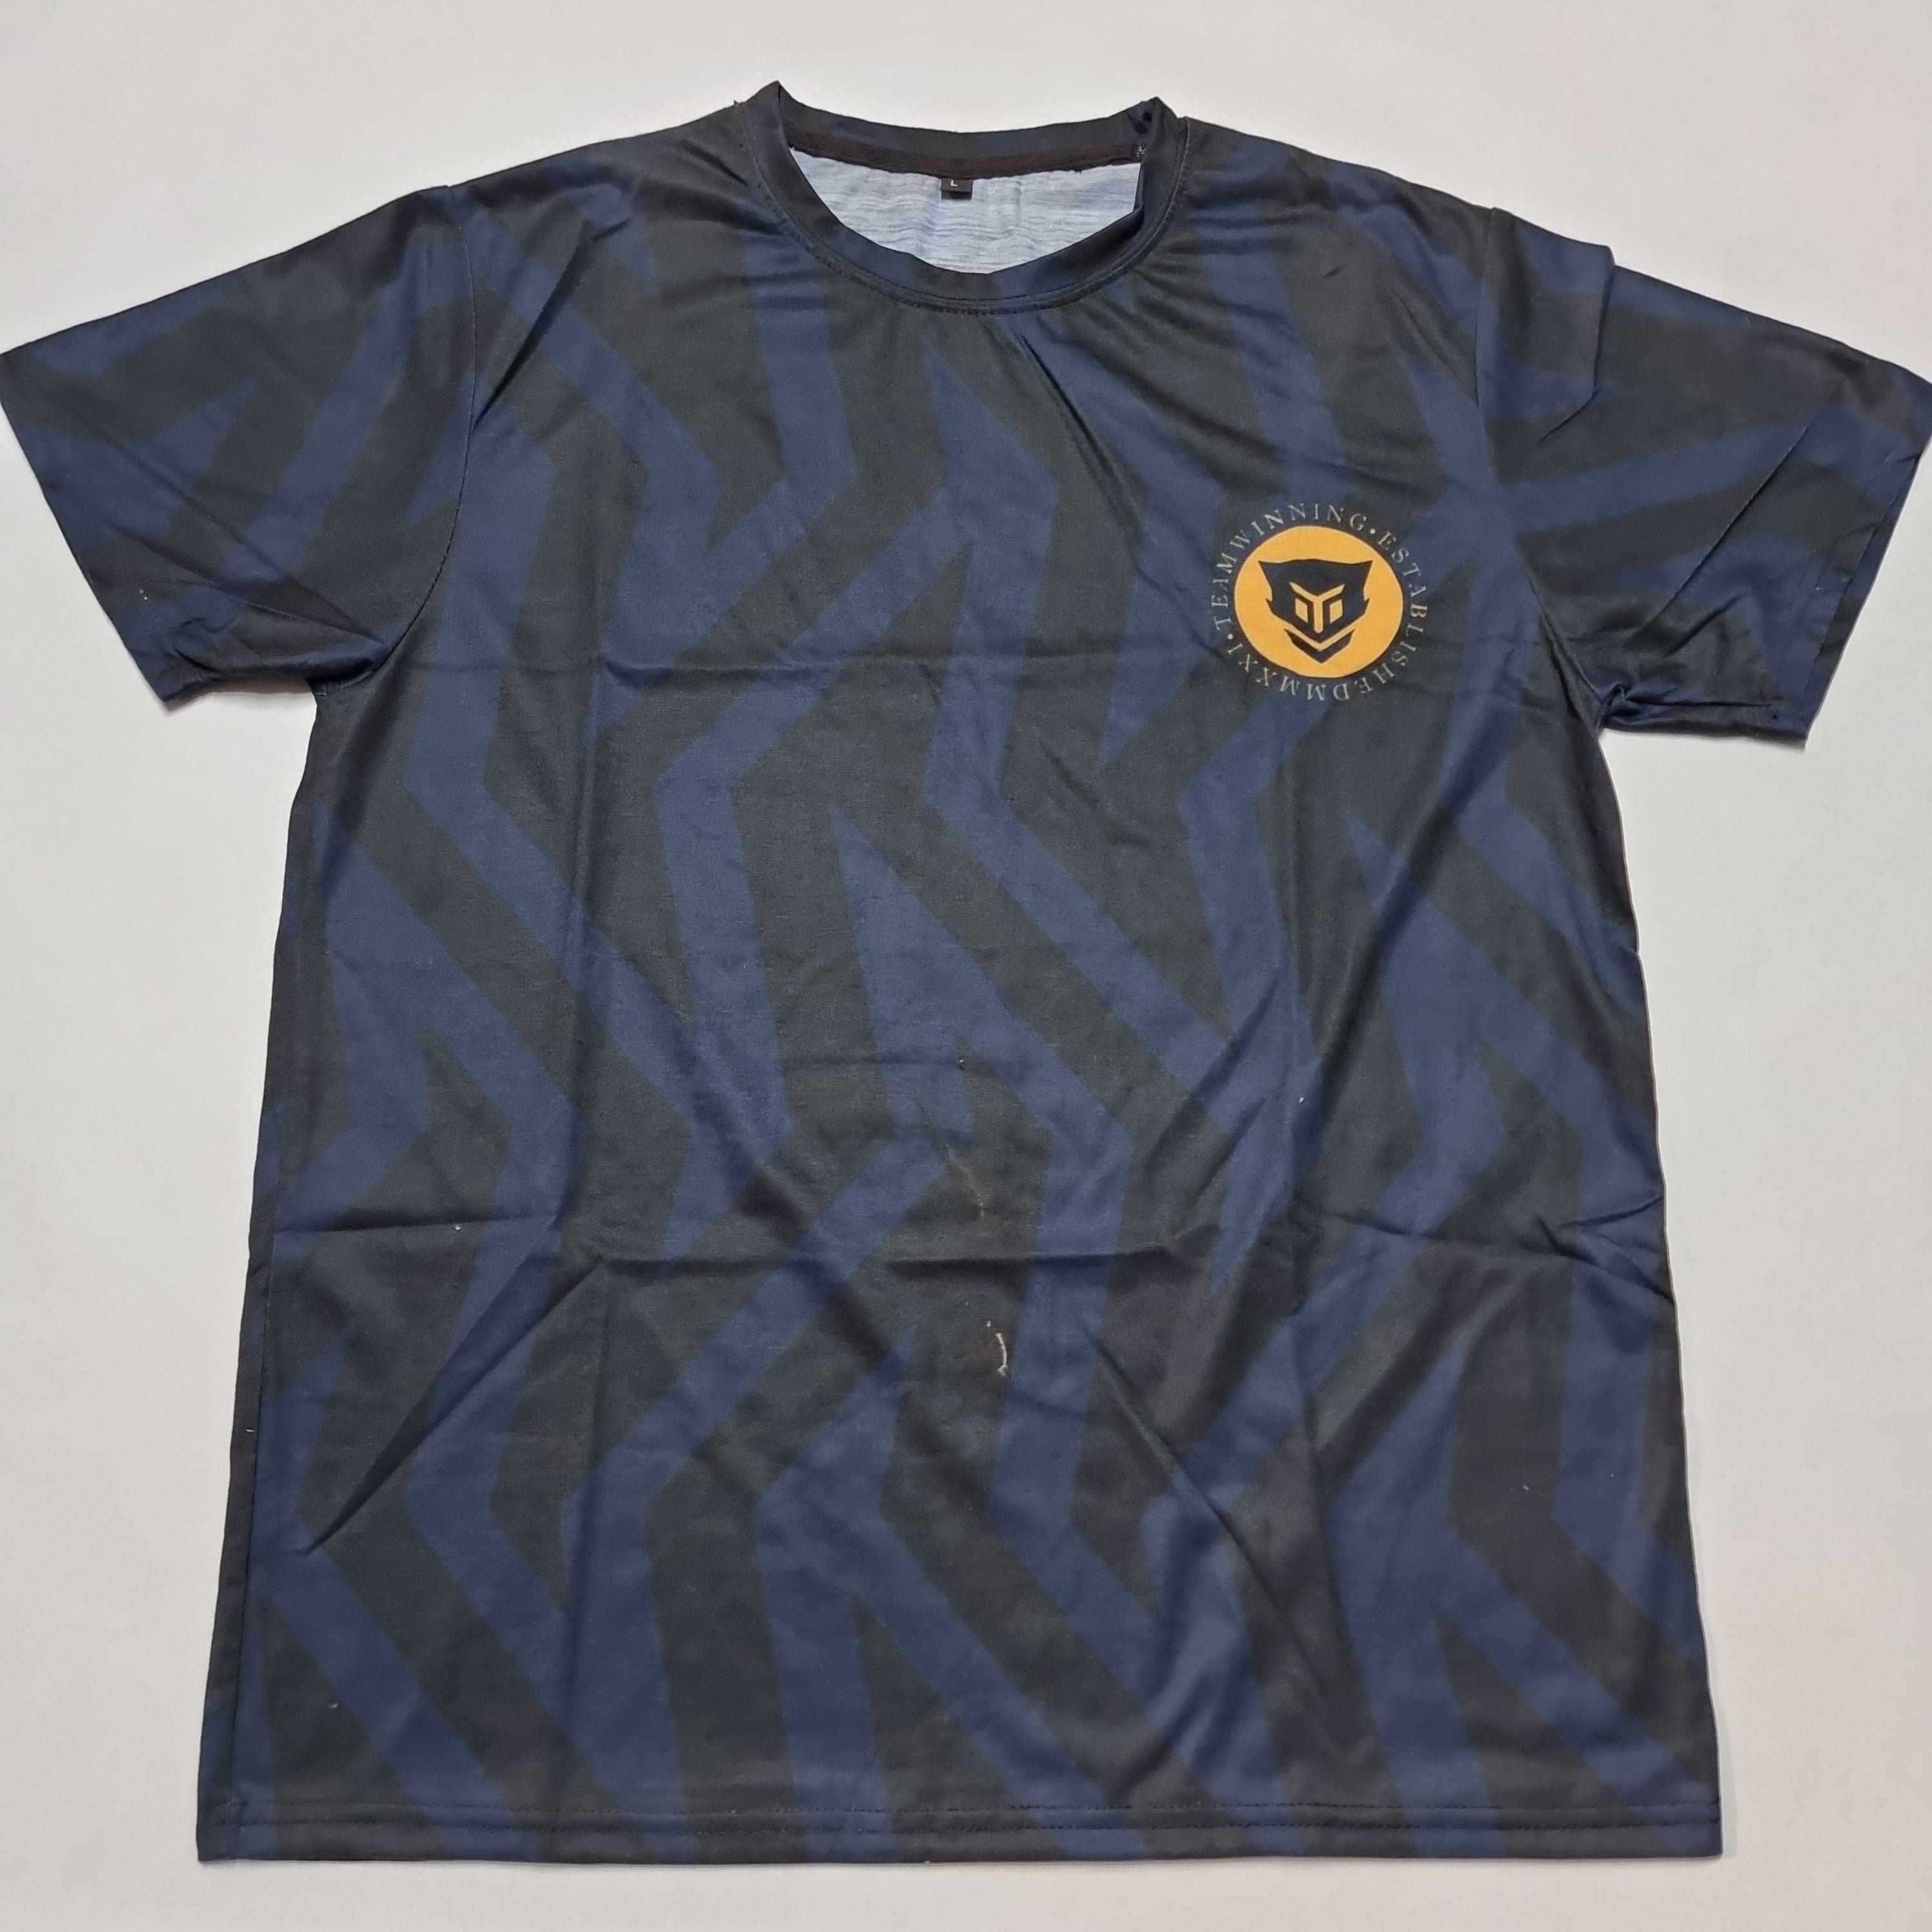 All over black blue with yellow logo tee